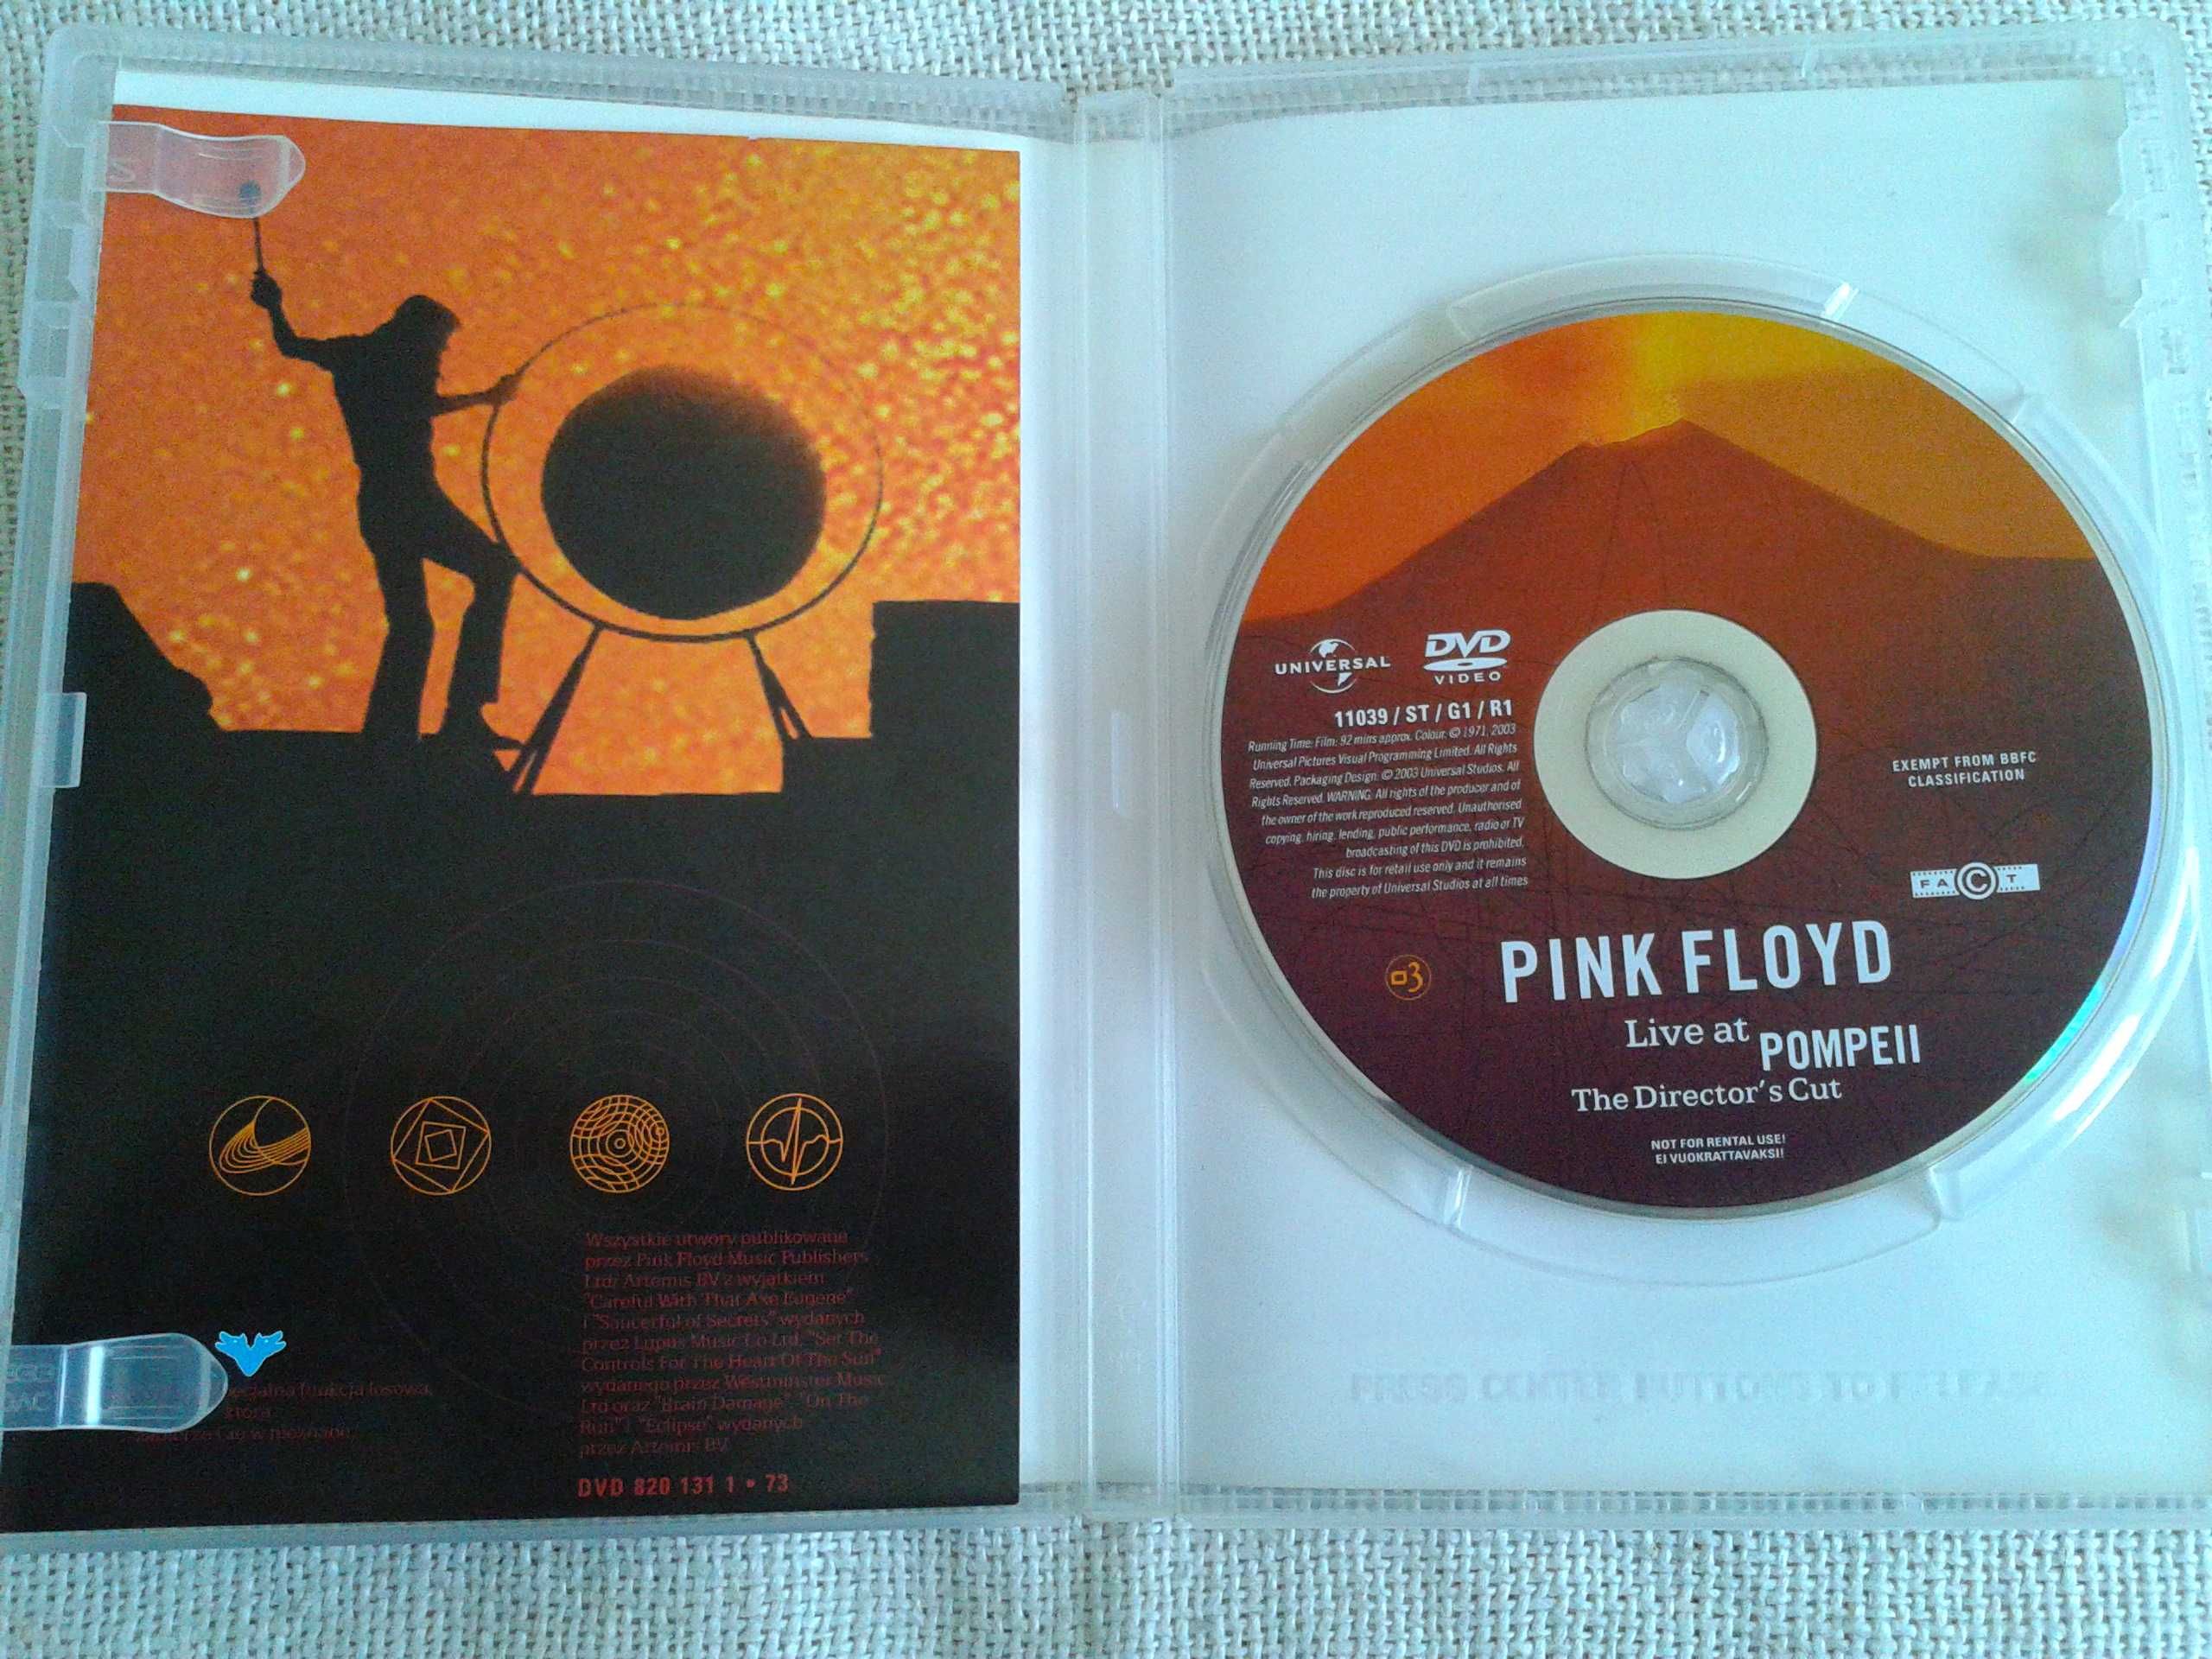 Pink Floyd - Live at Pompeii. The Director's Cut  DVD